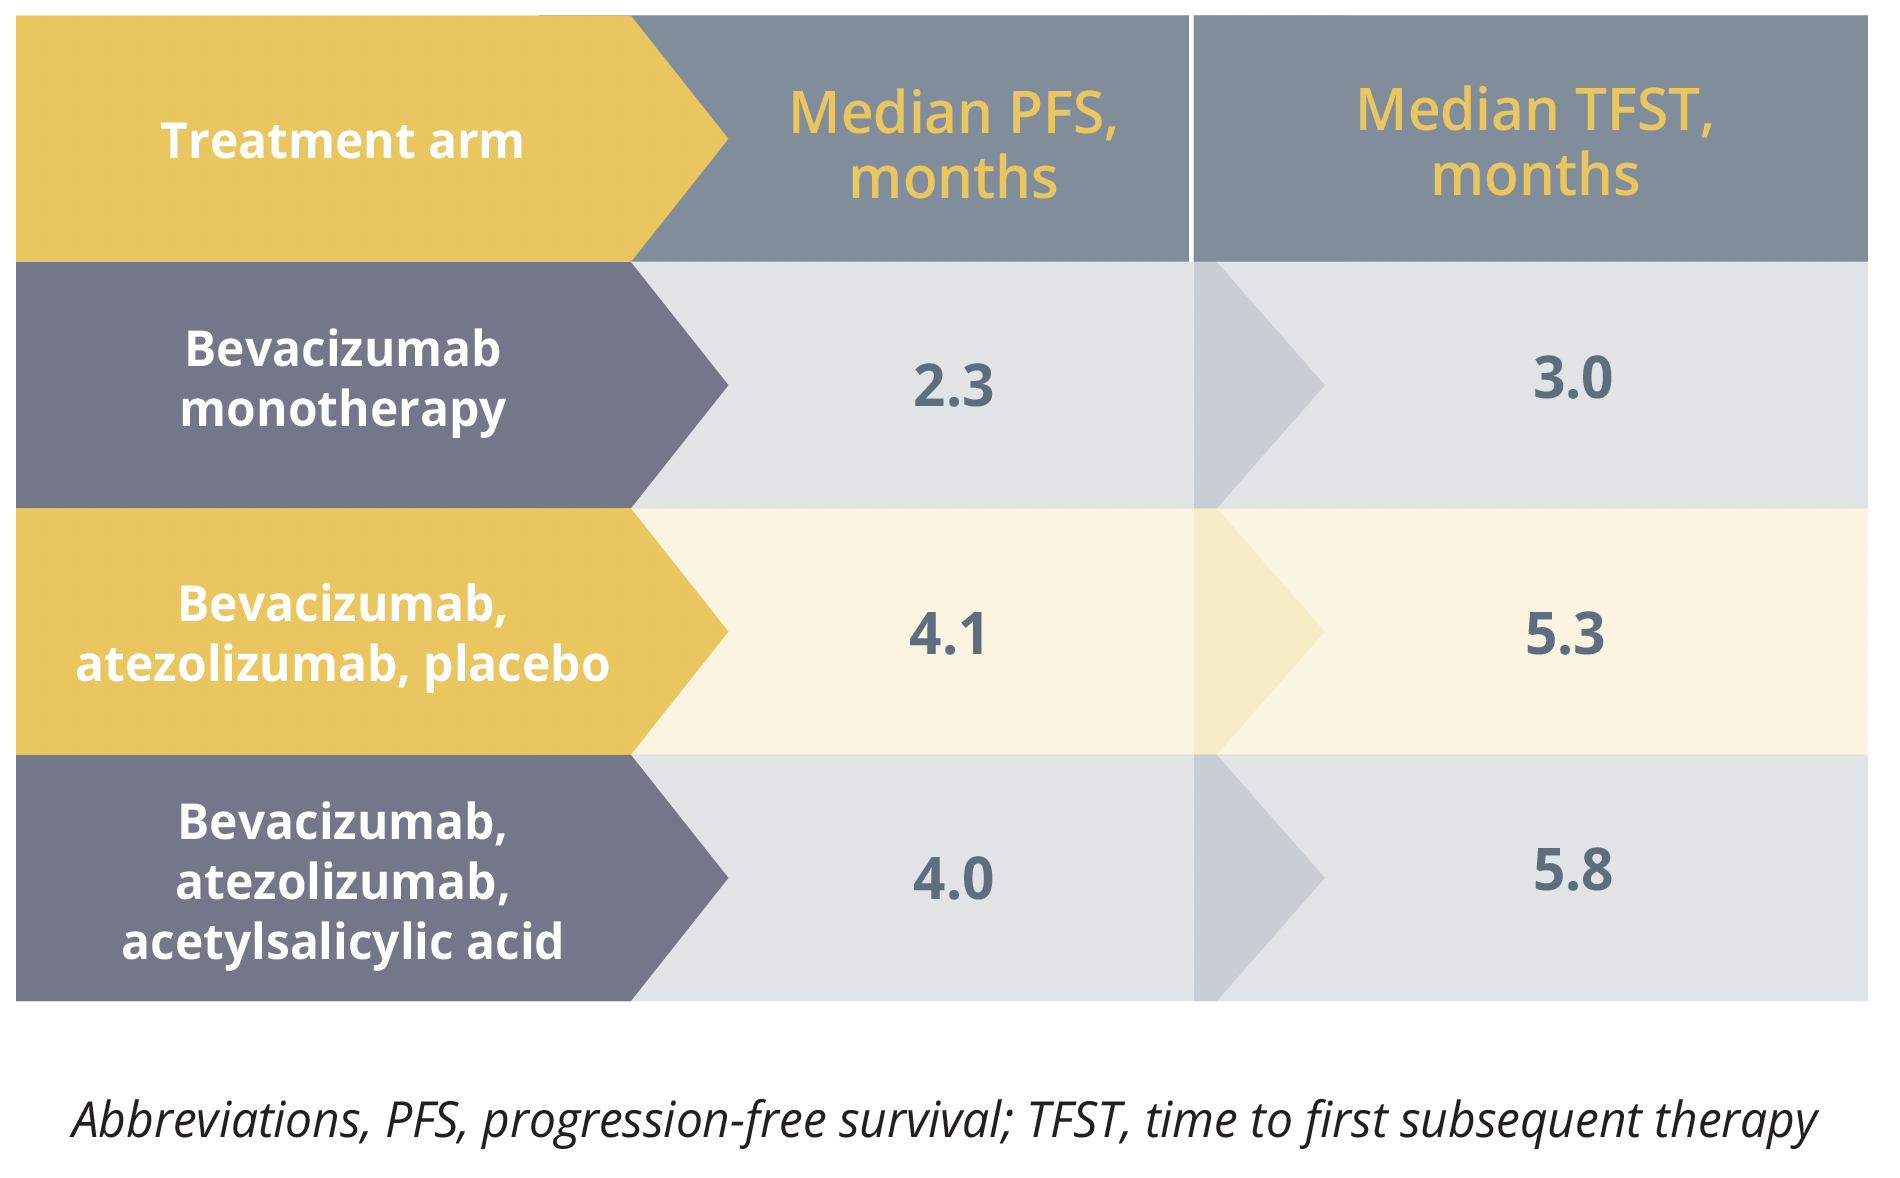 Positive PFS and time to first subsequent therapy outcomes with bevacizumab combination therapy versus bevacizumab monotherapy